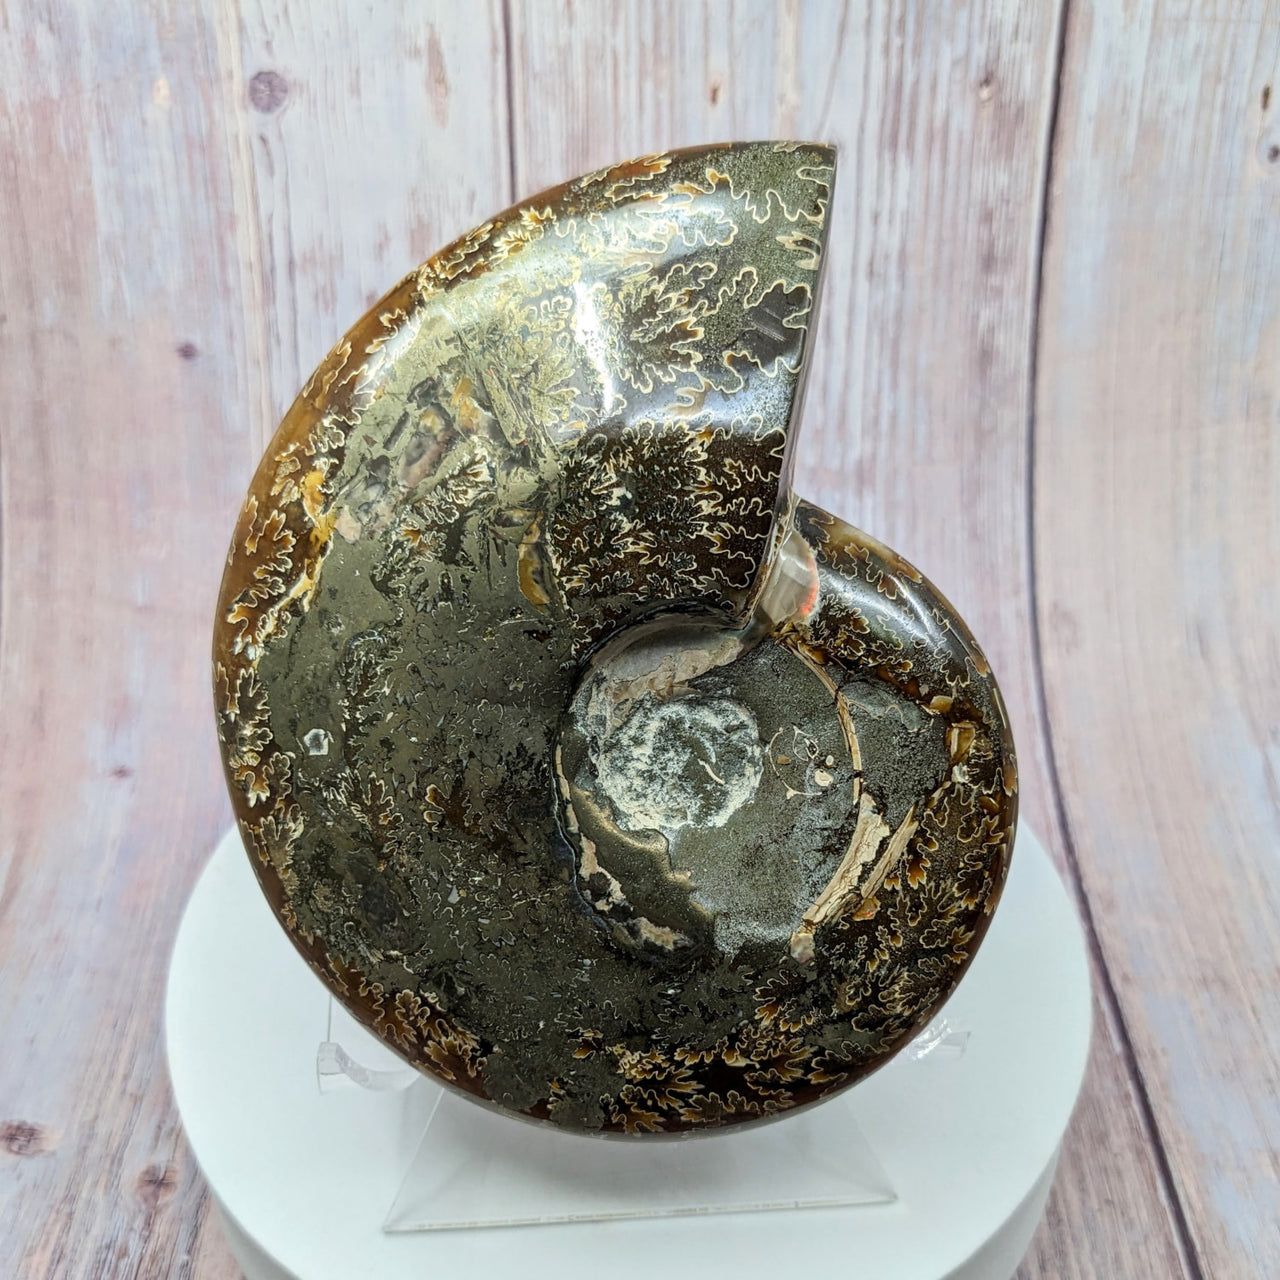 Ammonite Shell Specimen on Stand #SK9993: Black & Gold Fossil on a White Plate